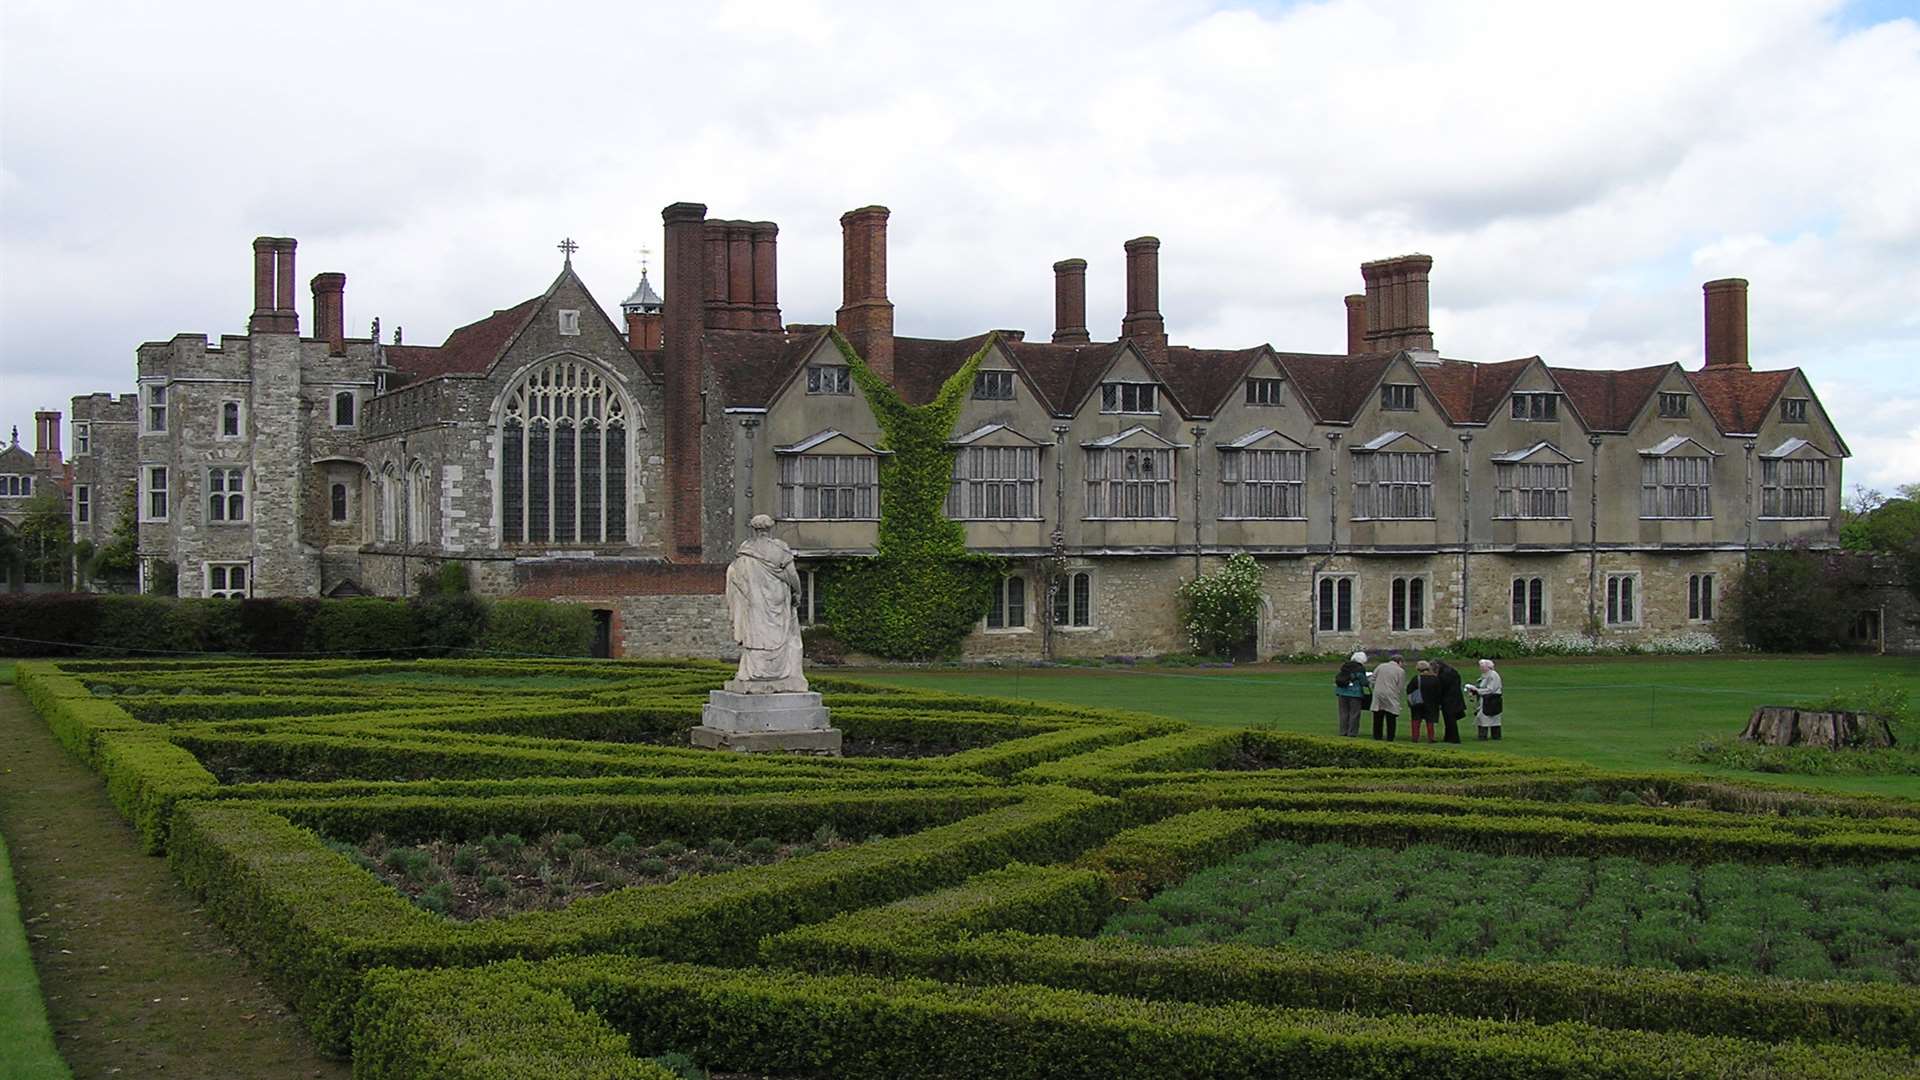 Lord Sackville's garden is a key attraction at Knole